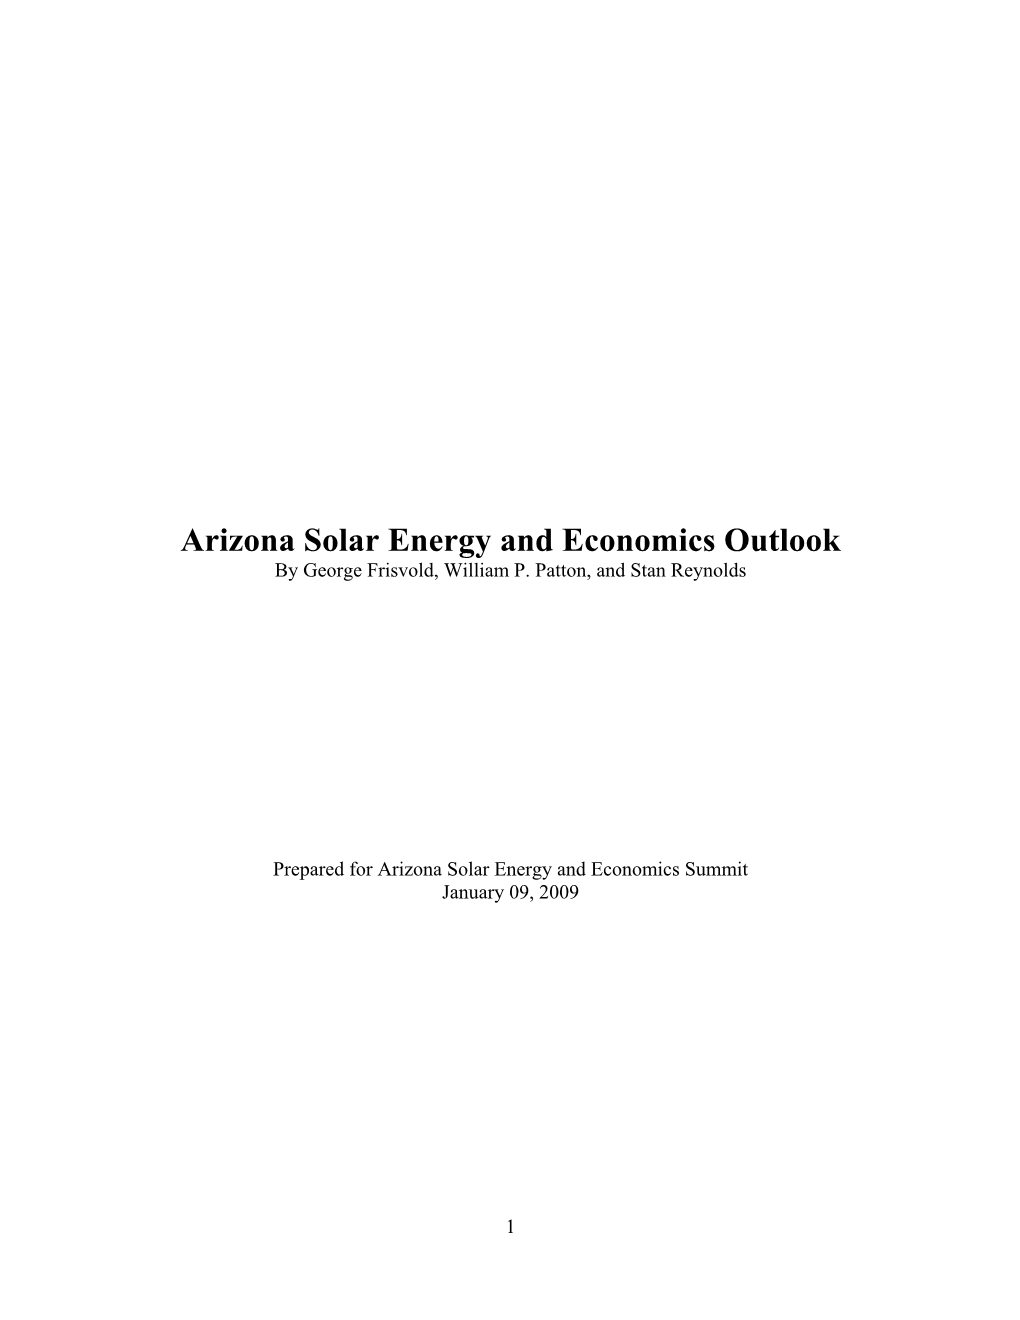 Arizona Solar Energy and Economics Outlook by George Frisvold, William P